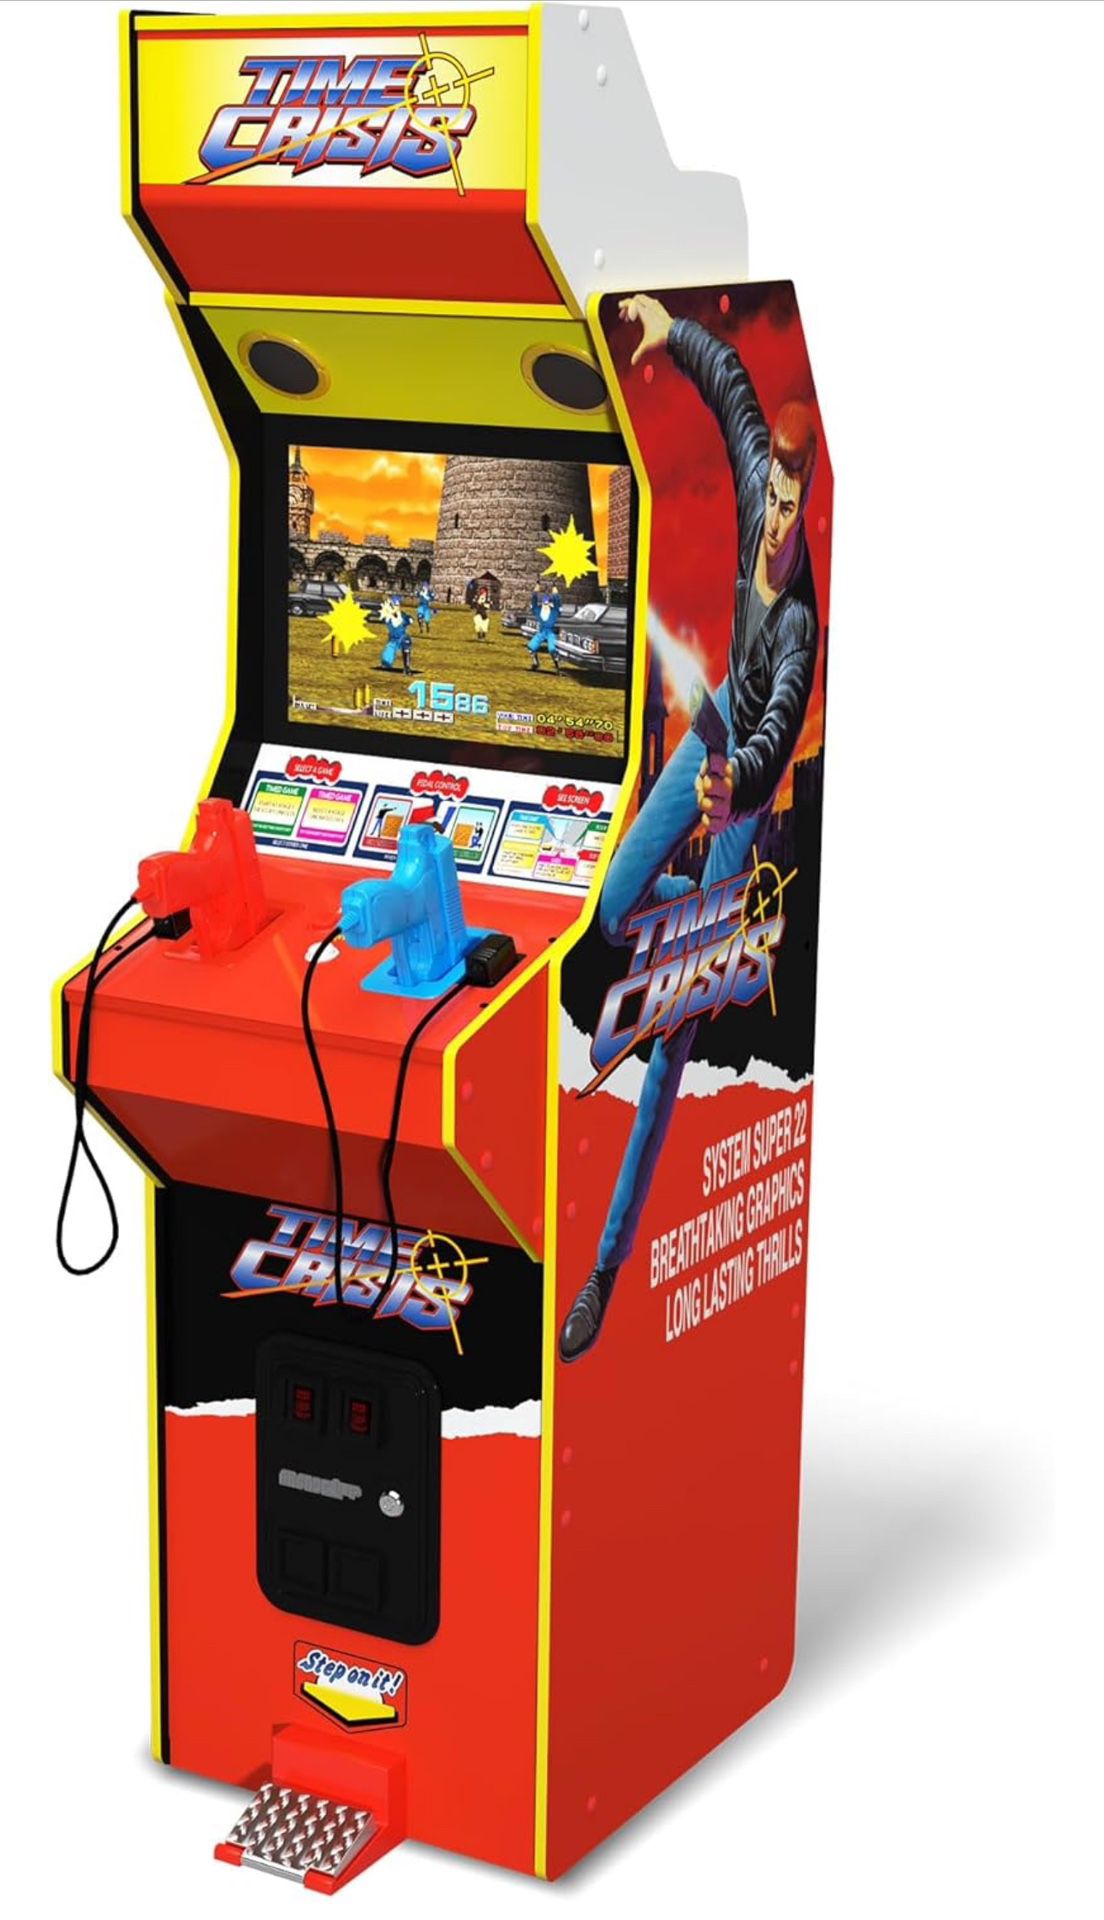 Arcade1Up 17 Inch High Resolution LCD Screen Multiplayer TIME Crisis Arcade Machine with Stand